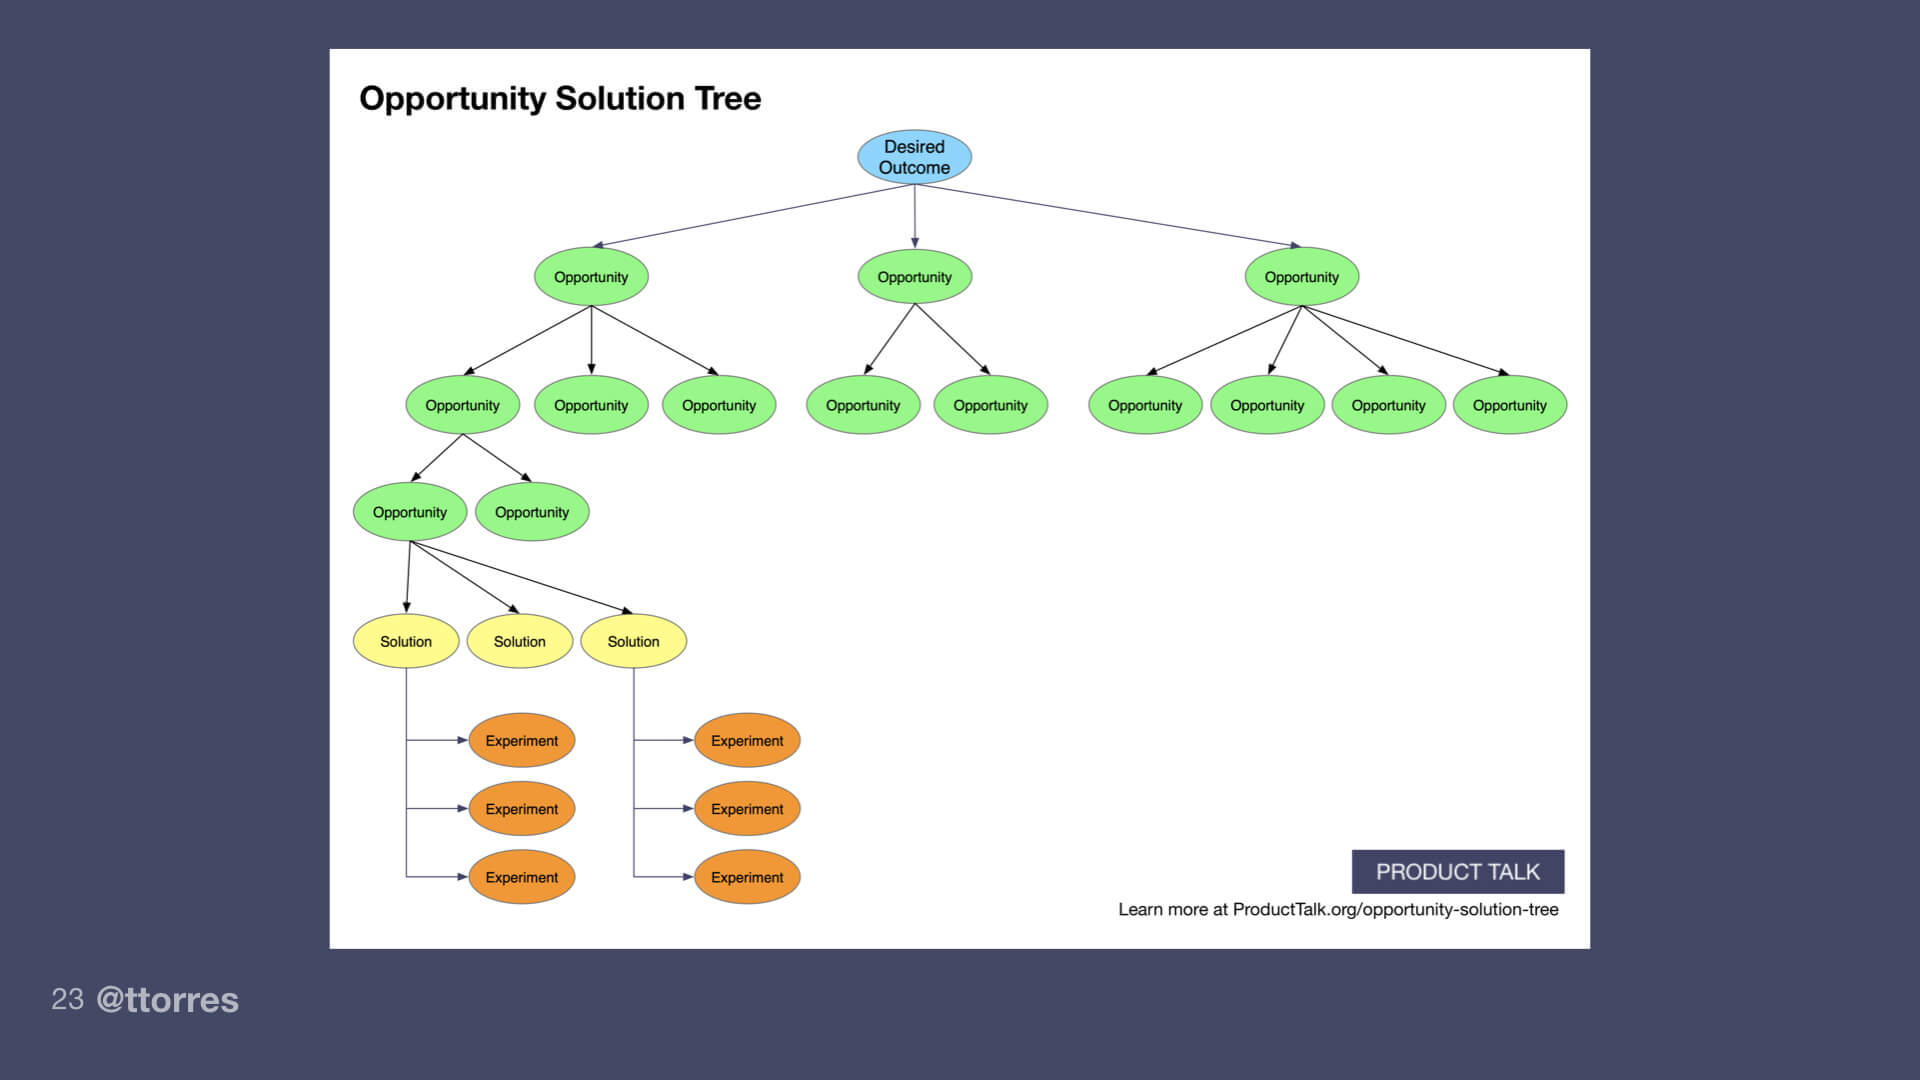 A diagram of an opportunity solution tree with a desired outcome at the top, several opportunities branching out below it, and several solutions and experiments branching off from the opportunities.